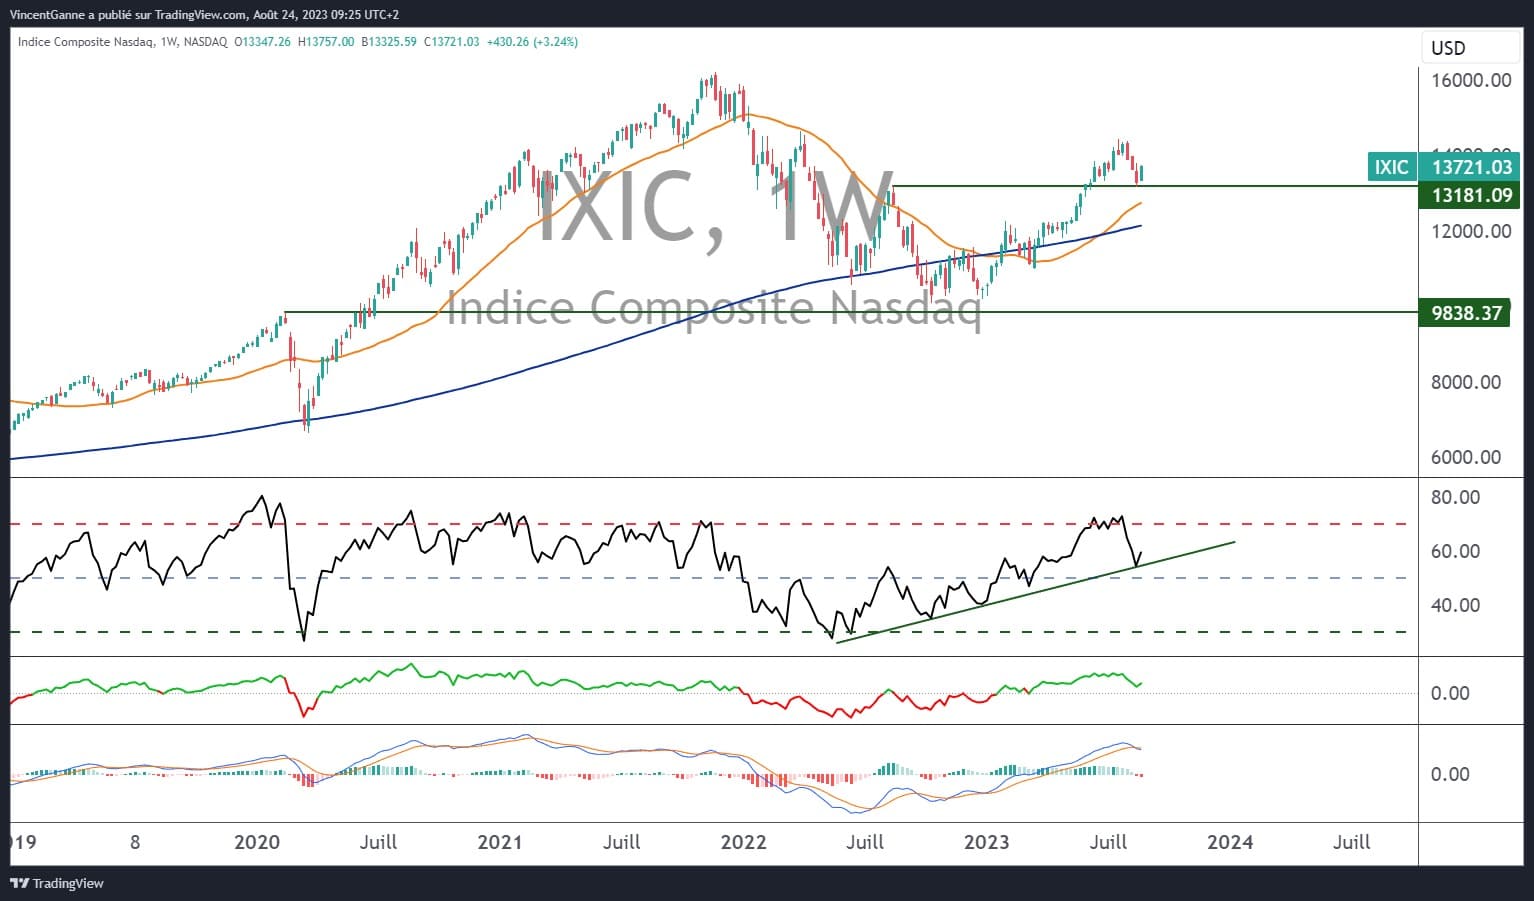 Chart showing weekly Japanese candlesticks on the Nasdaq Composite index